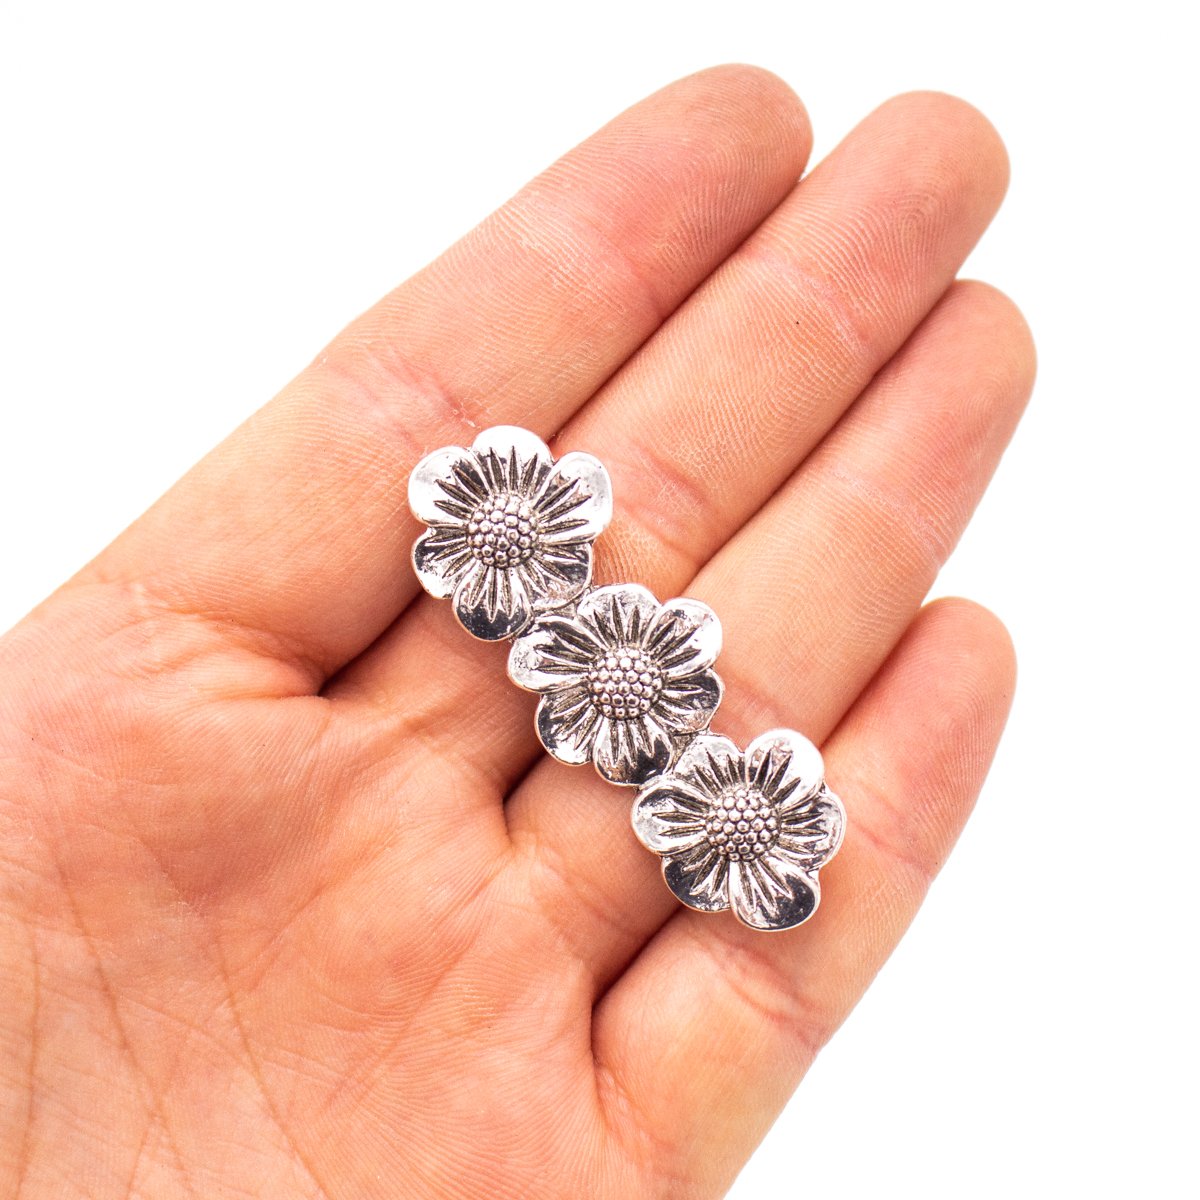 5Pcs For 10mm flat leather,AntiqueThree flower bracelet accessories jewelry supplies jewelry finding D-1-10-239